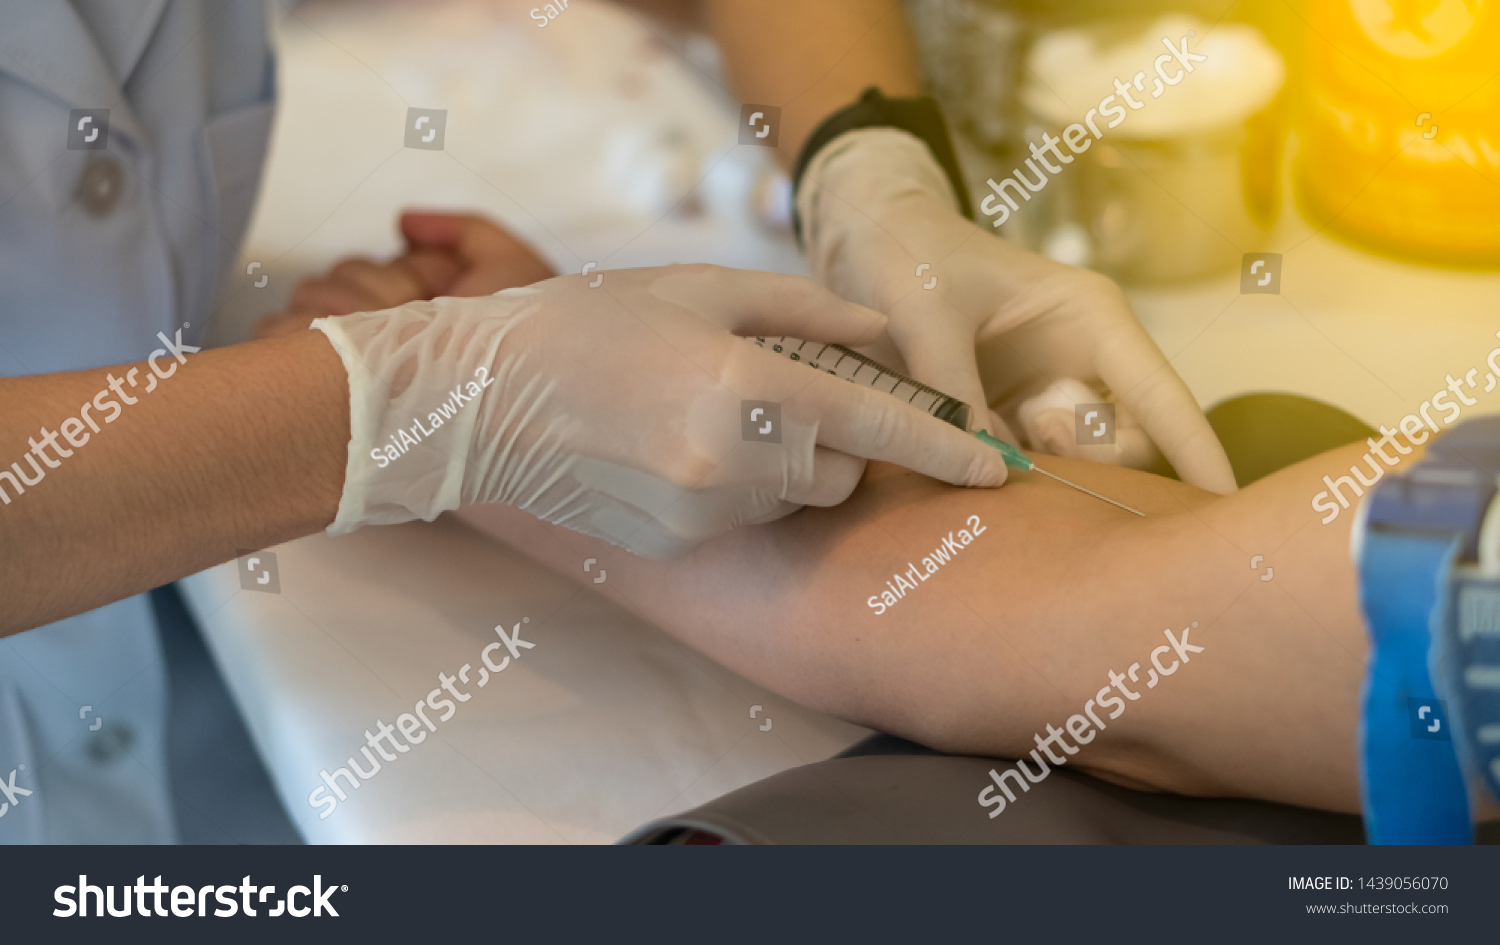 Blood collection, blood collection, see a doctor for the diagnosis of workers #1439056070